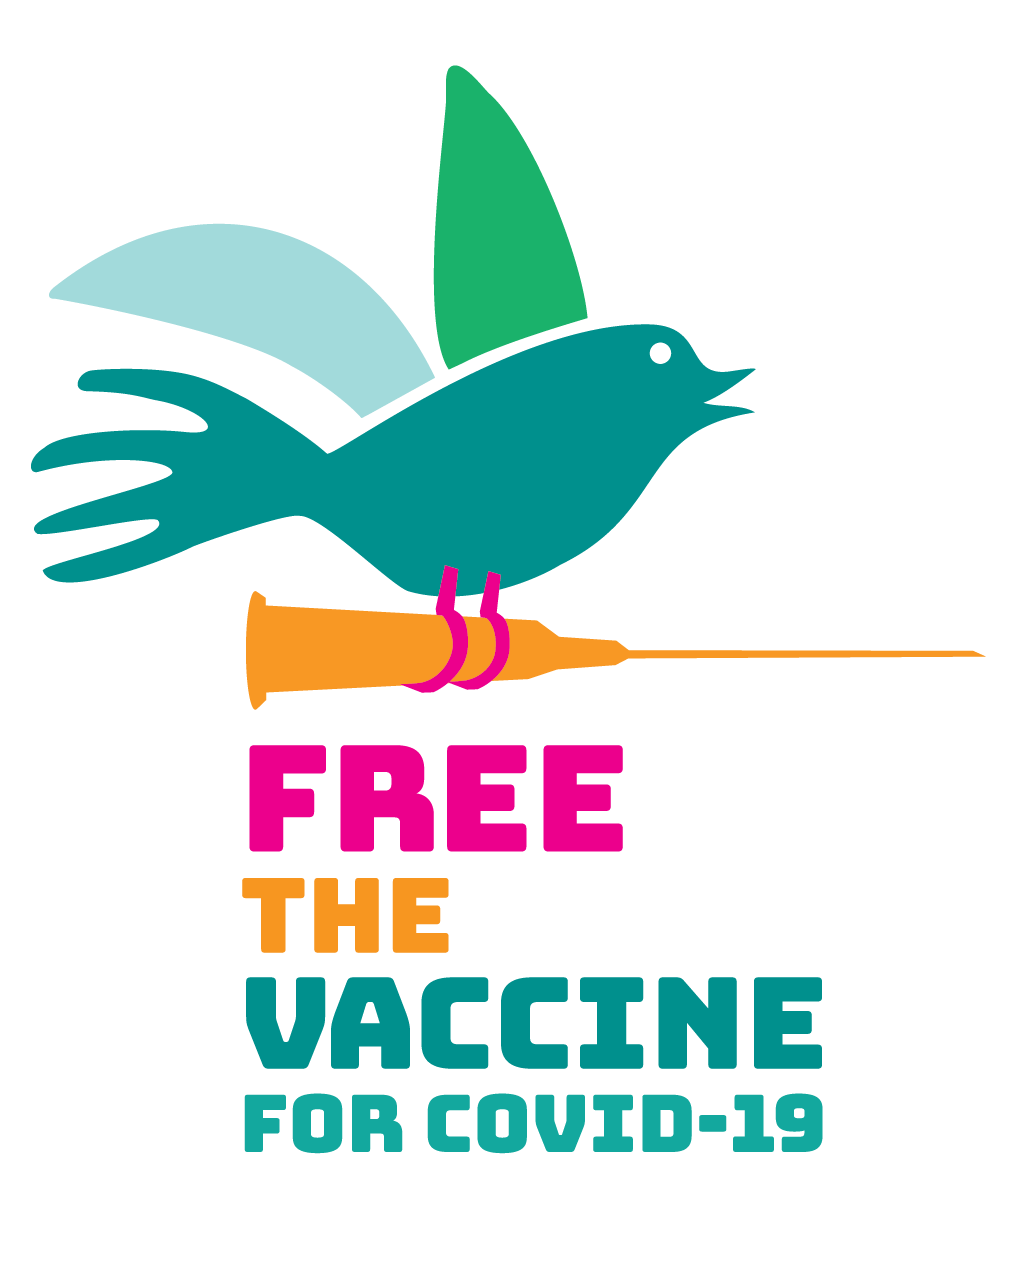 Free the Vaccine for Covid-19 logo